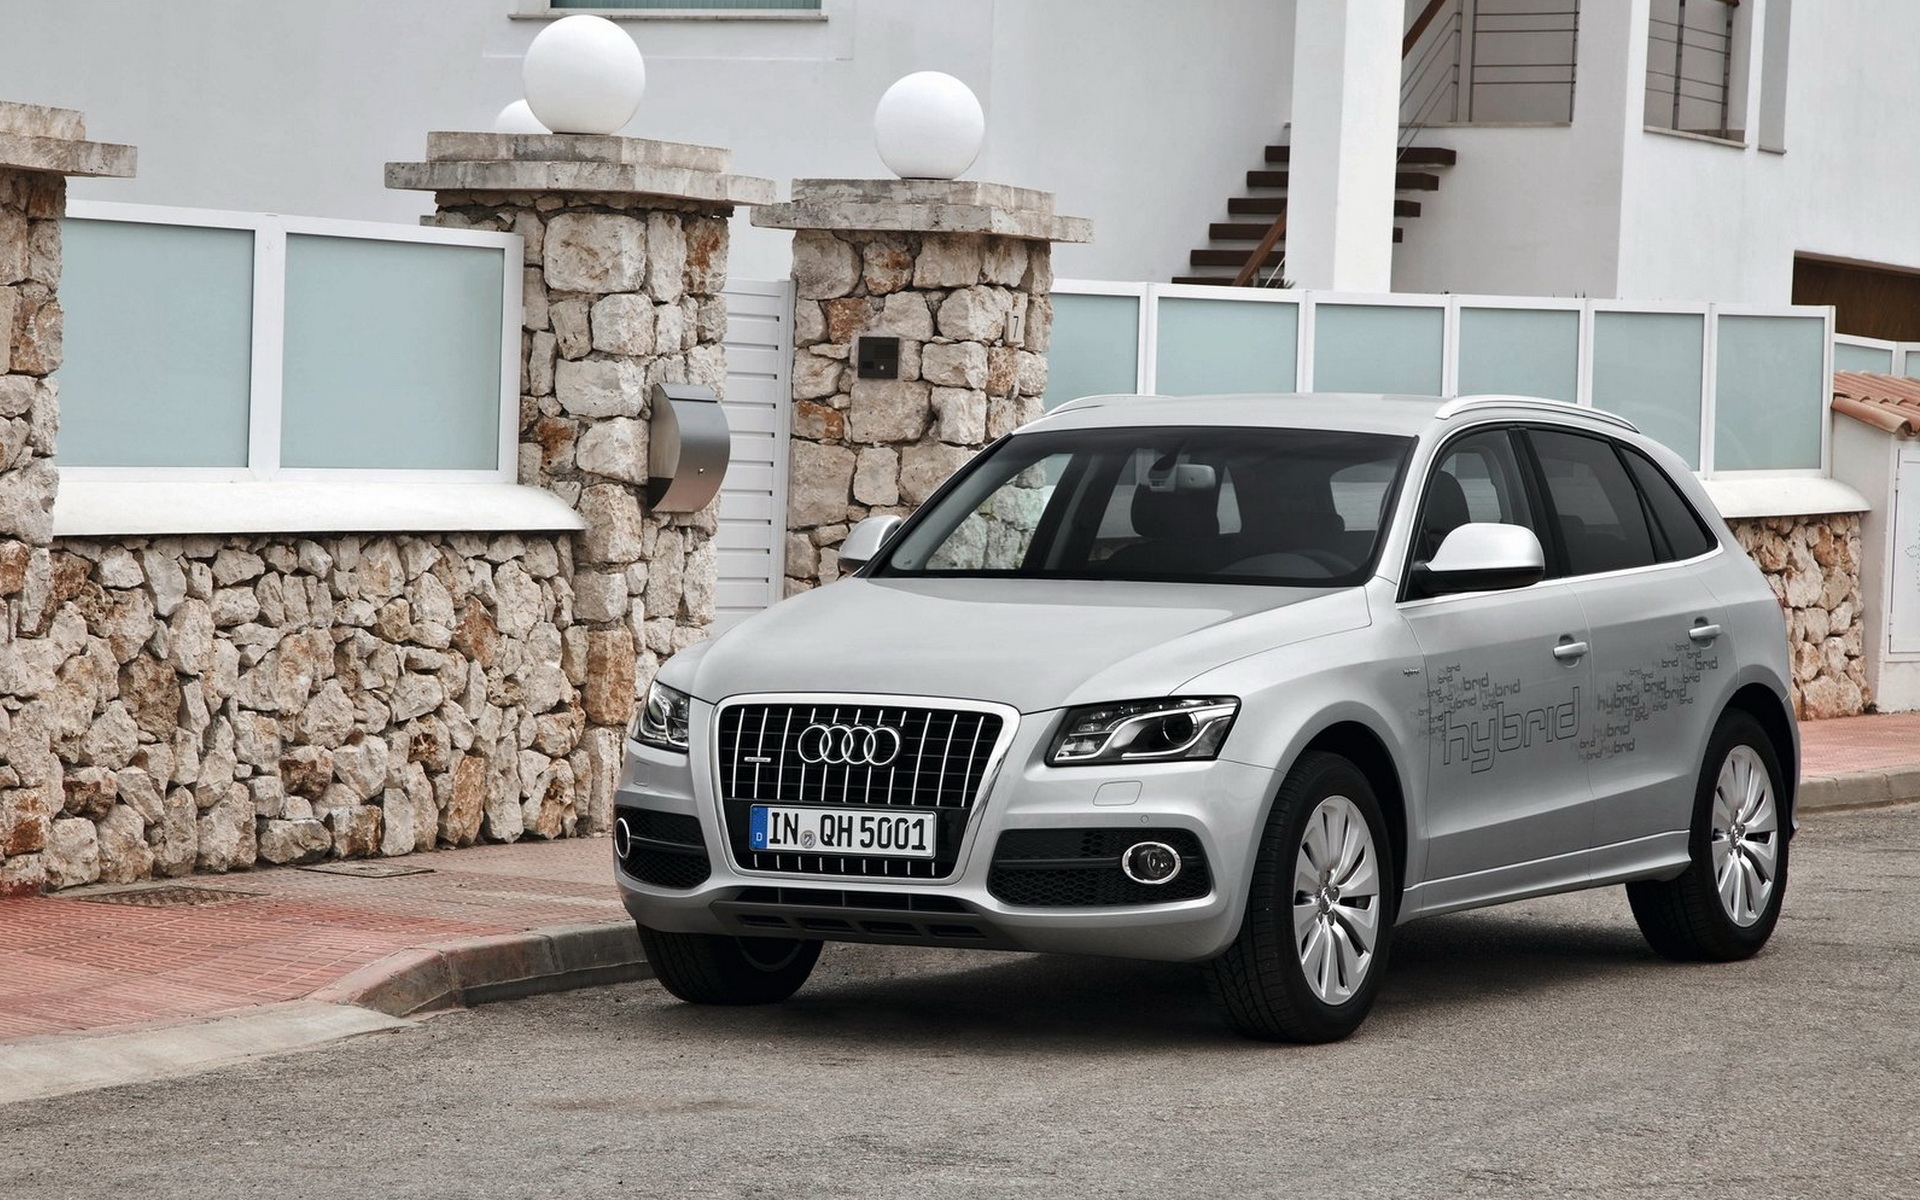 Audi Q5 wallpapers and images - wallpapers, pictures, photos